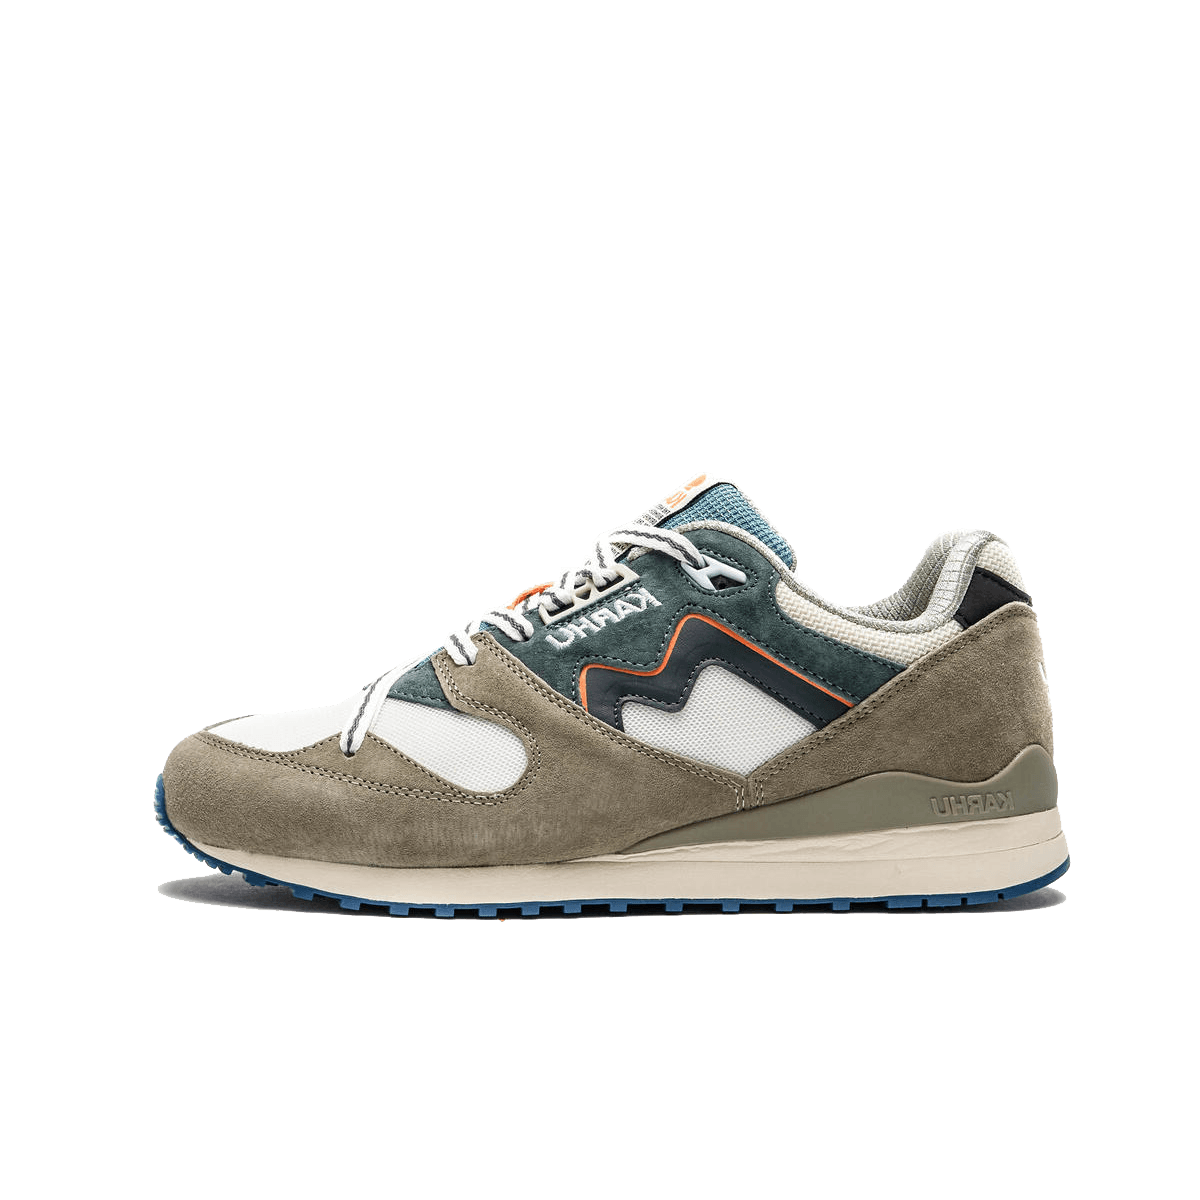 Karhu Synchron Classic 'The Forest Rules'